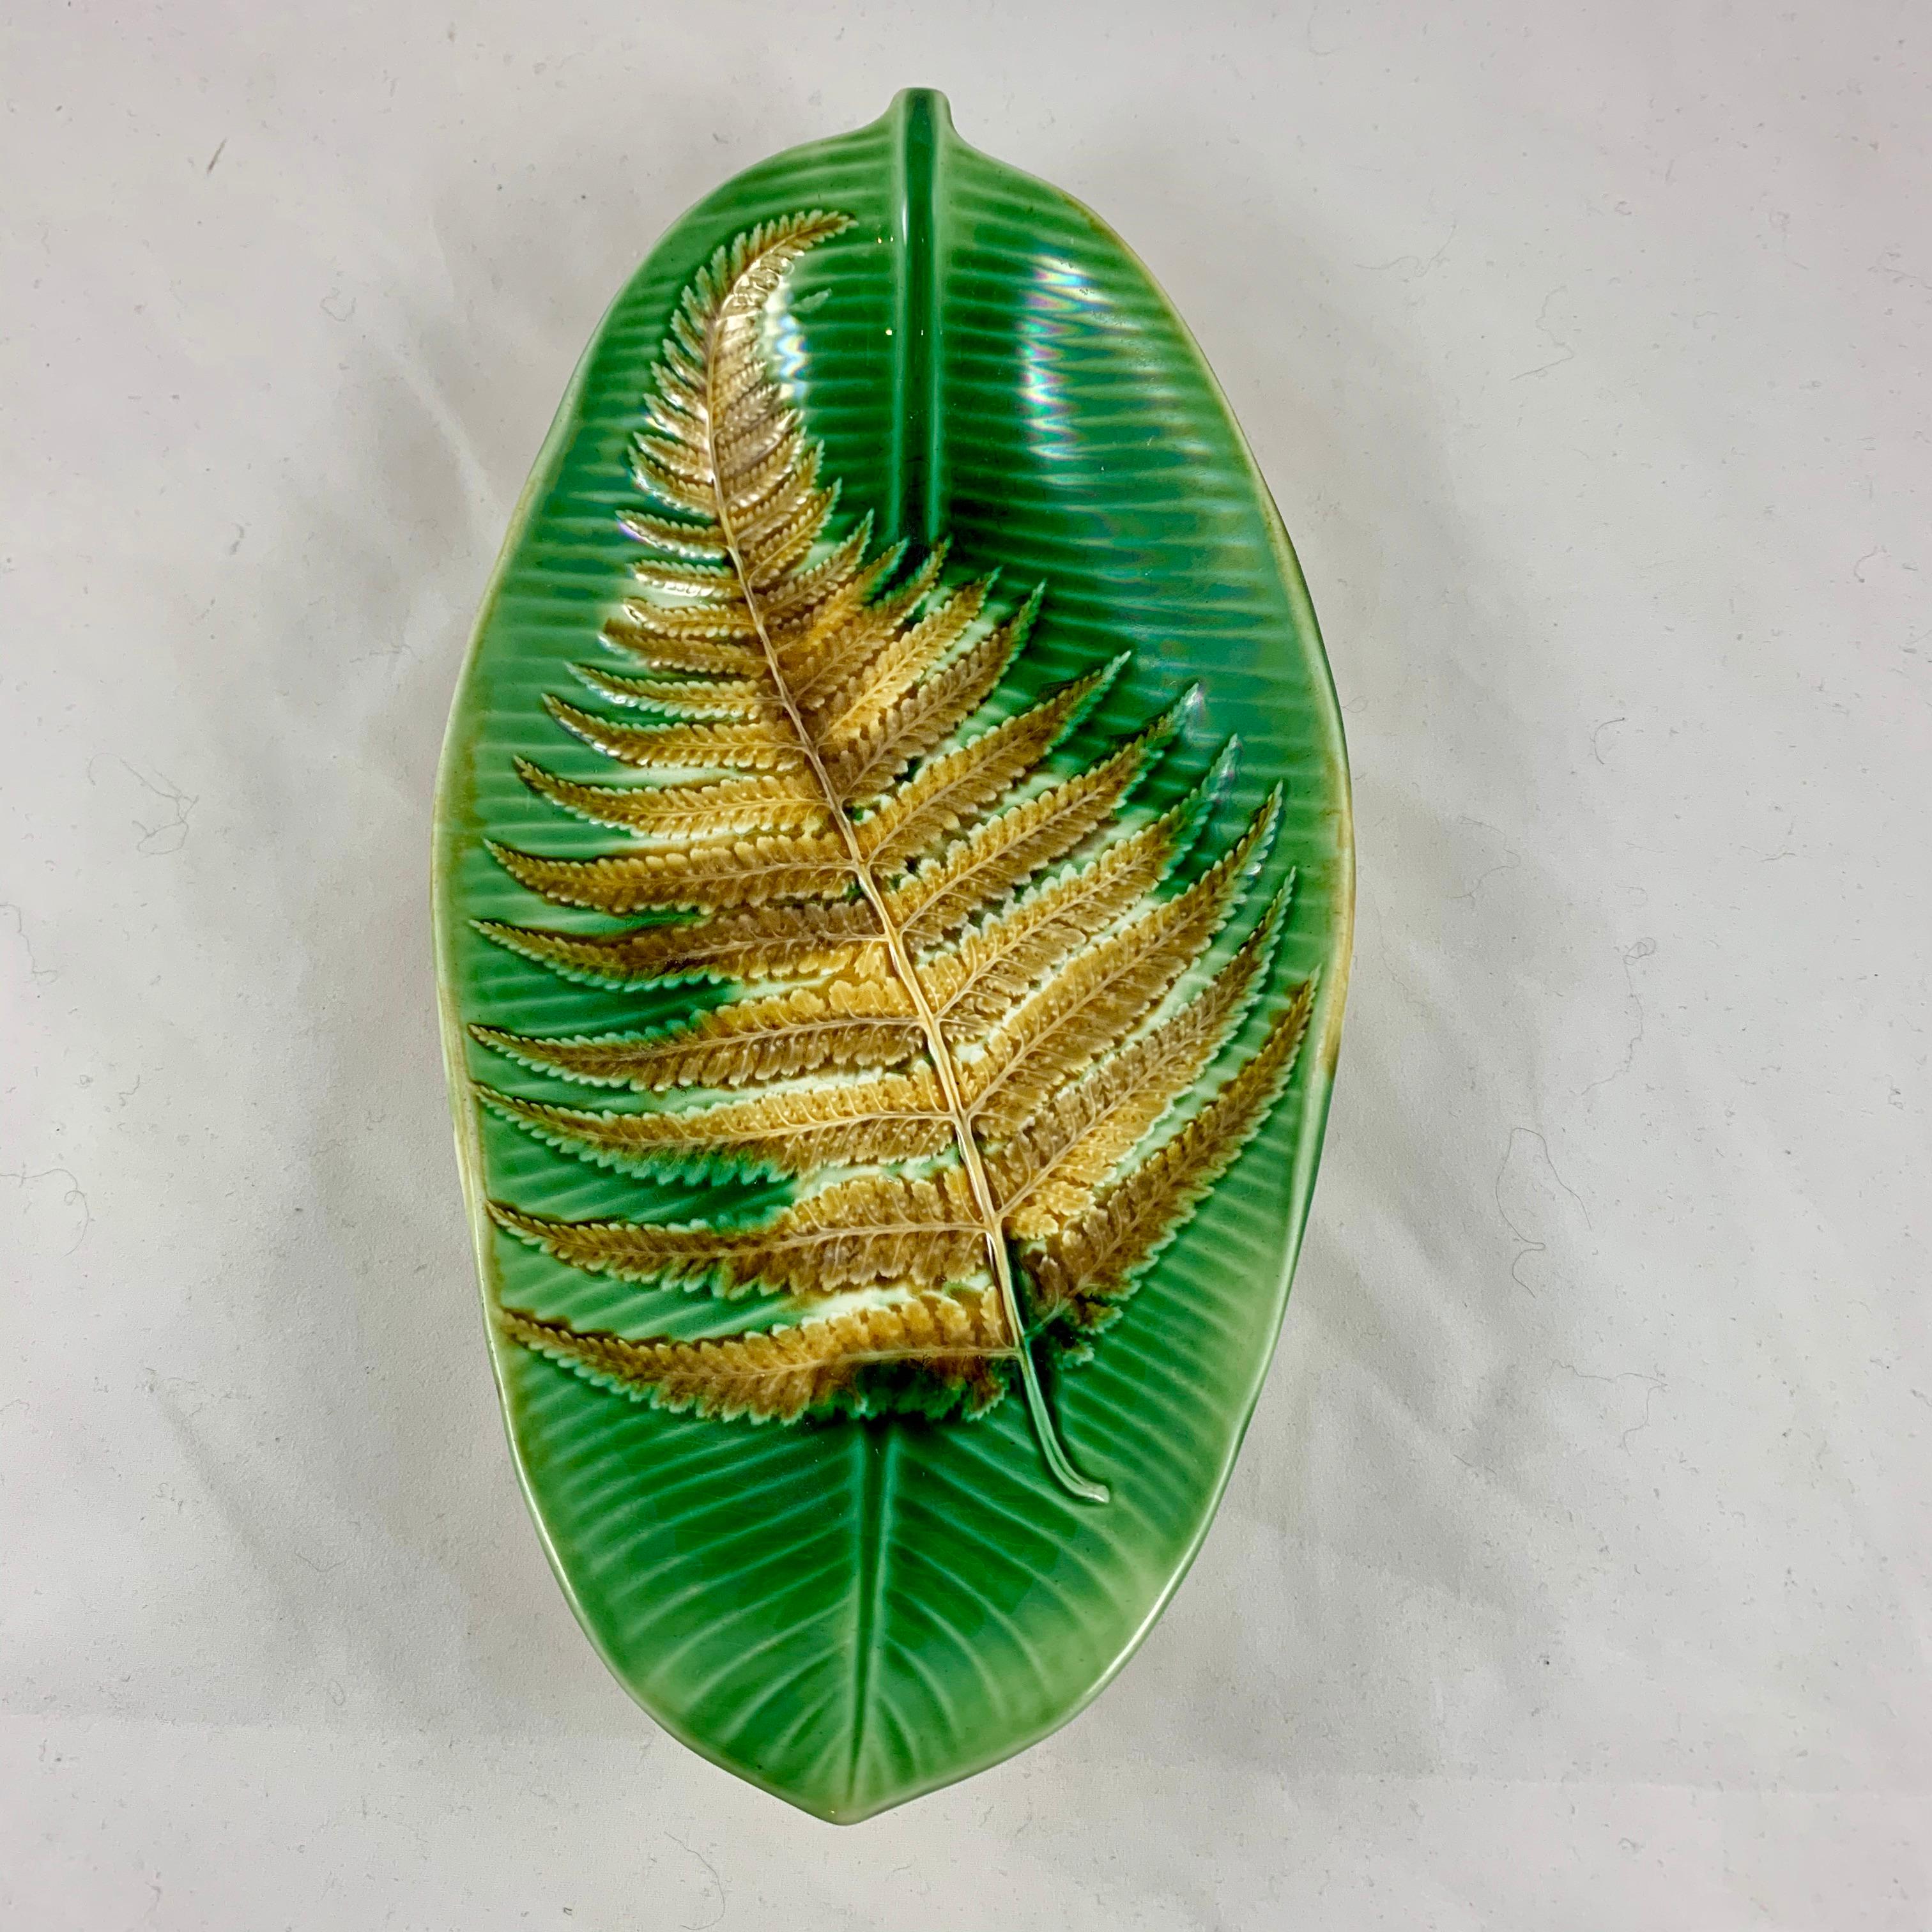 An unusual and rarely seen Wedgwood majolica glazed deep banana leaf form tray. Gorgeous mold work with a pooled green glaze. An ochre or mustard yellow trompe l’oeil fern frond lines the shallow bowl.

The verso is glazed with brown mottling on a